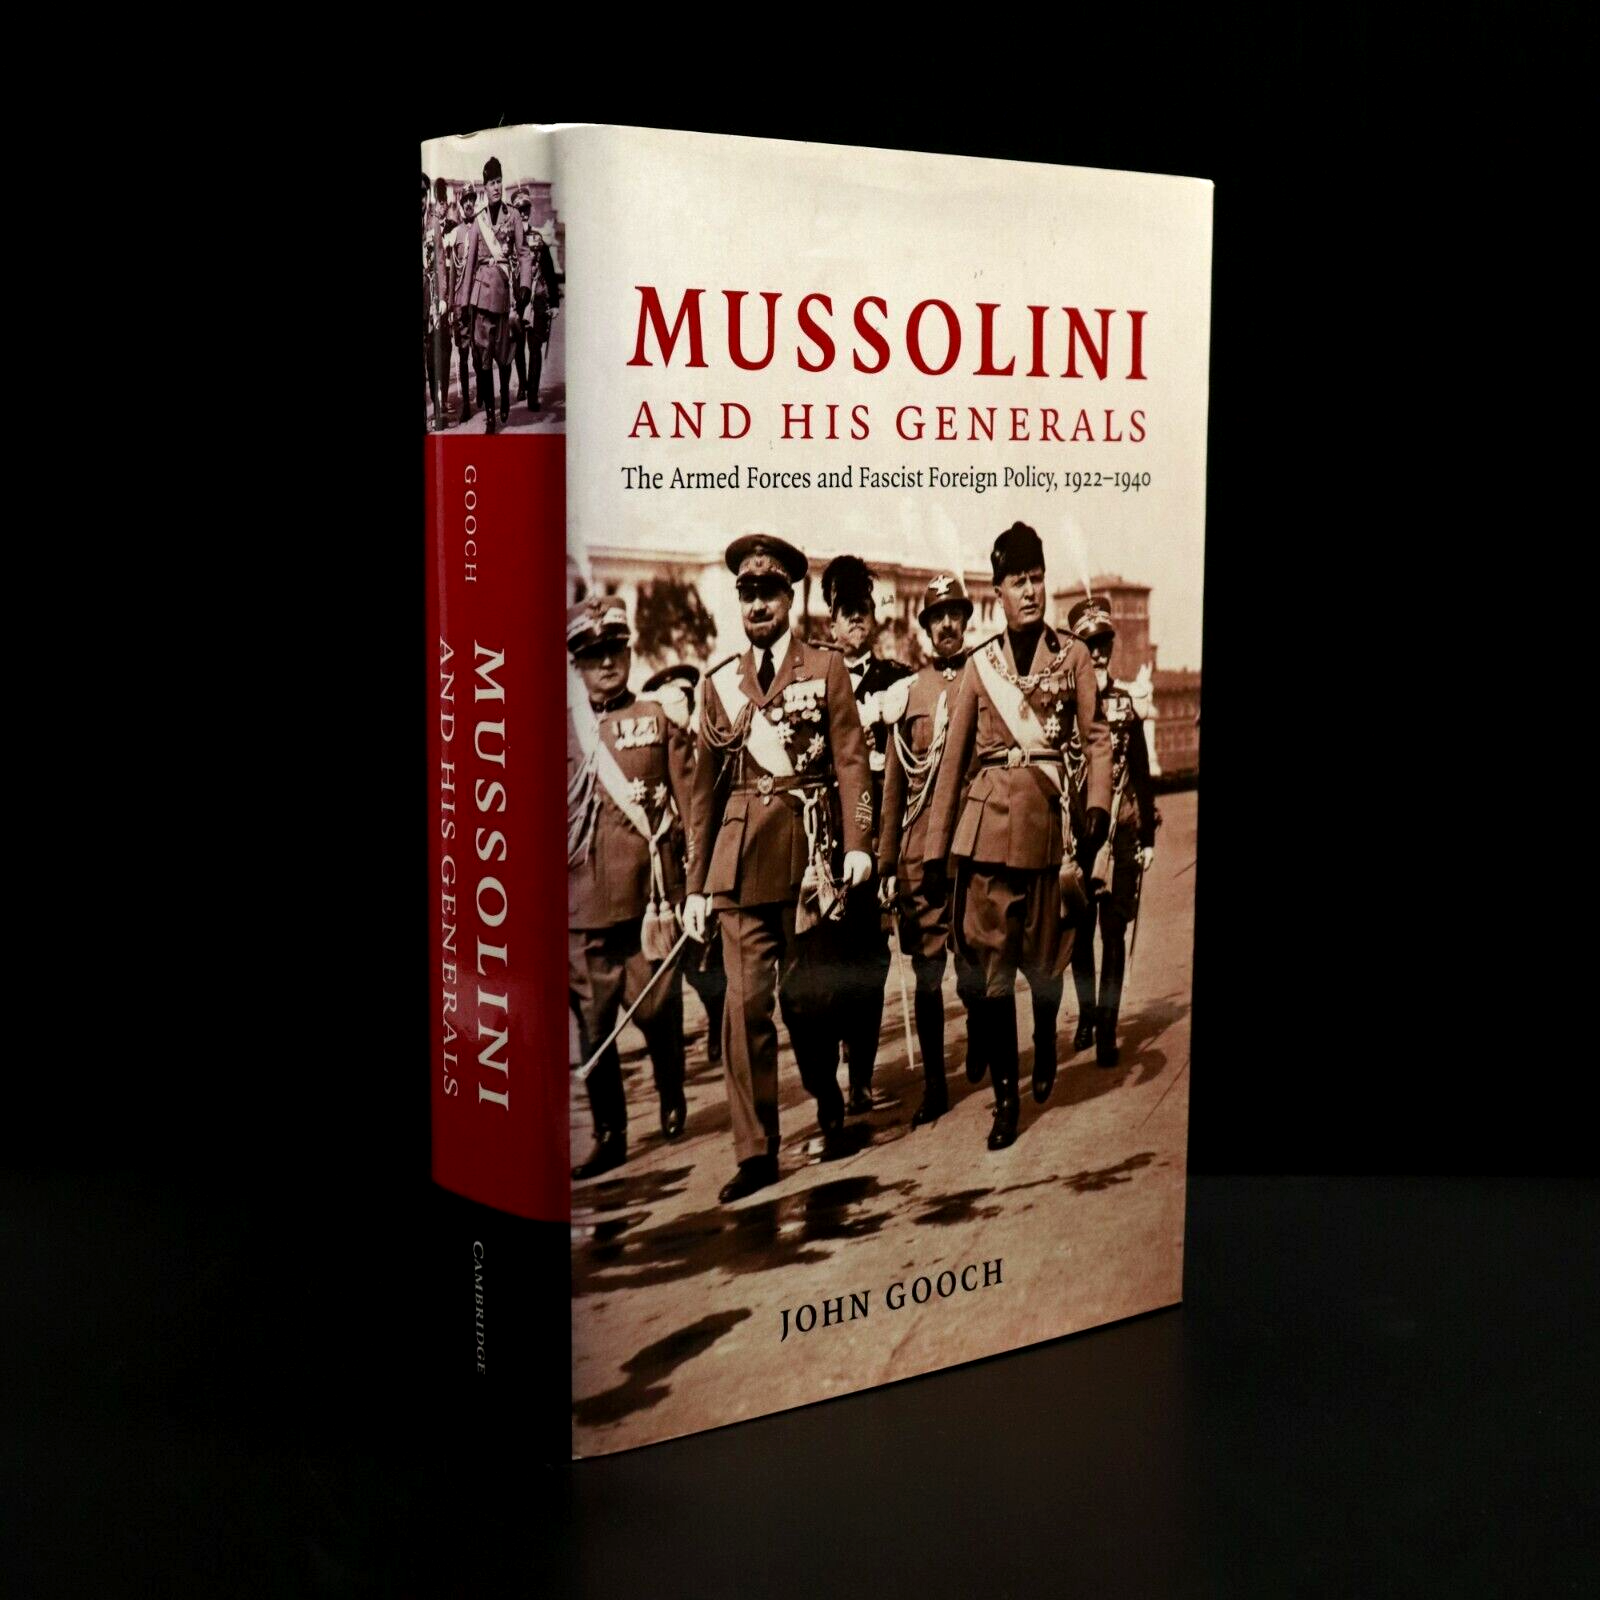 2007 Mussolini And His Generals by John Gooch Military History Book WW2 Italy